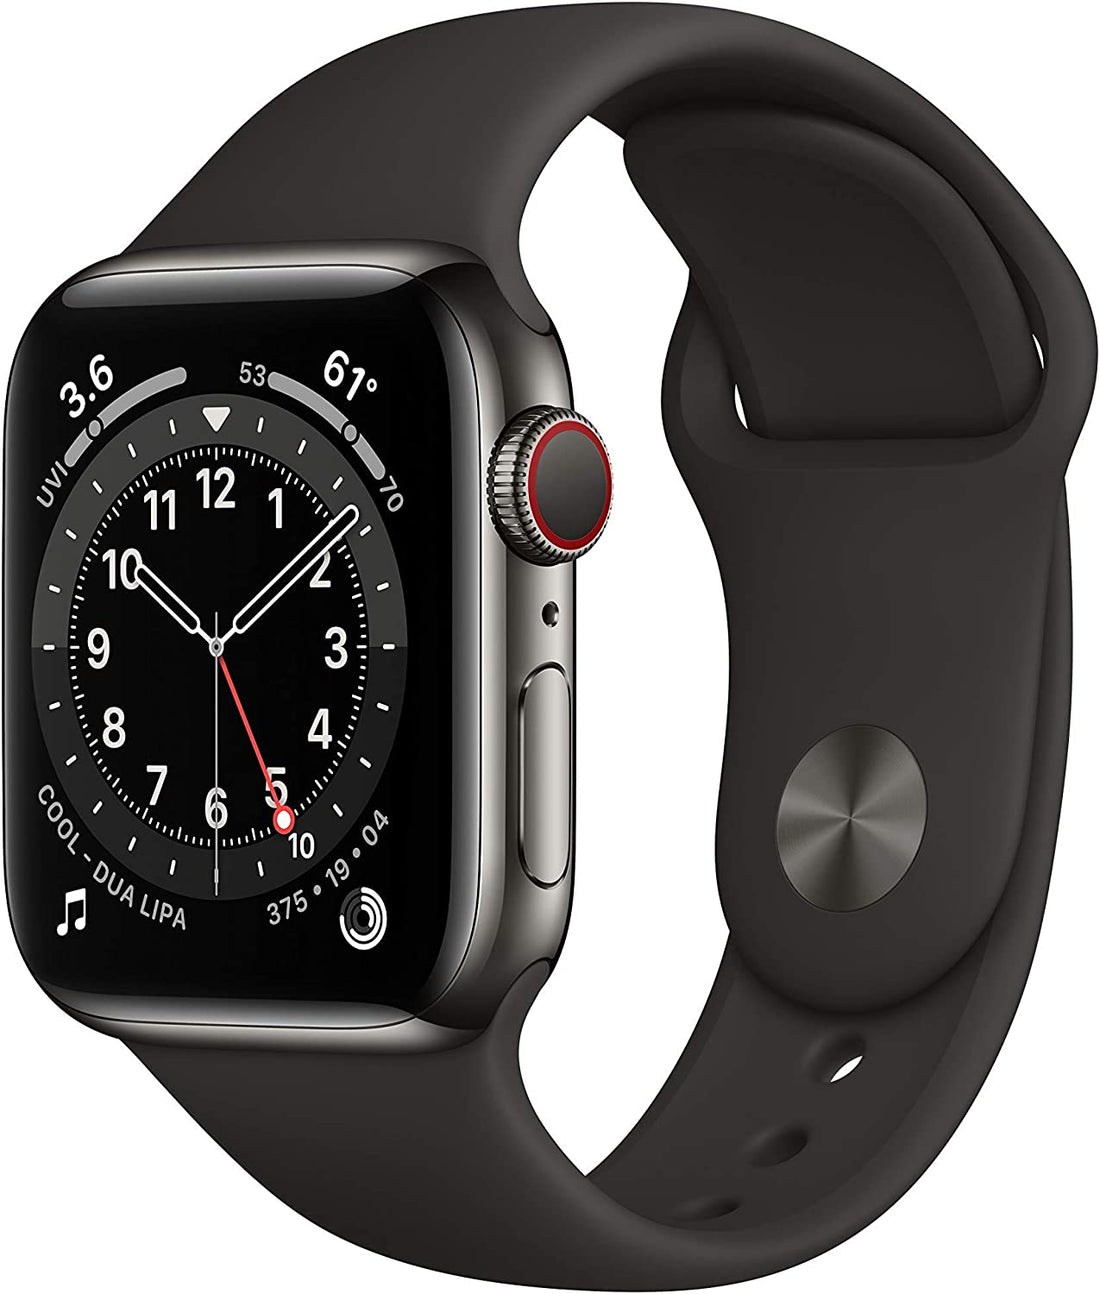 Apple Watch Series 6 (GPS + LTE) 40mm Graphite Stainless Steel Case &amp; Black Sport Band (Refurbished)